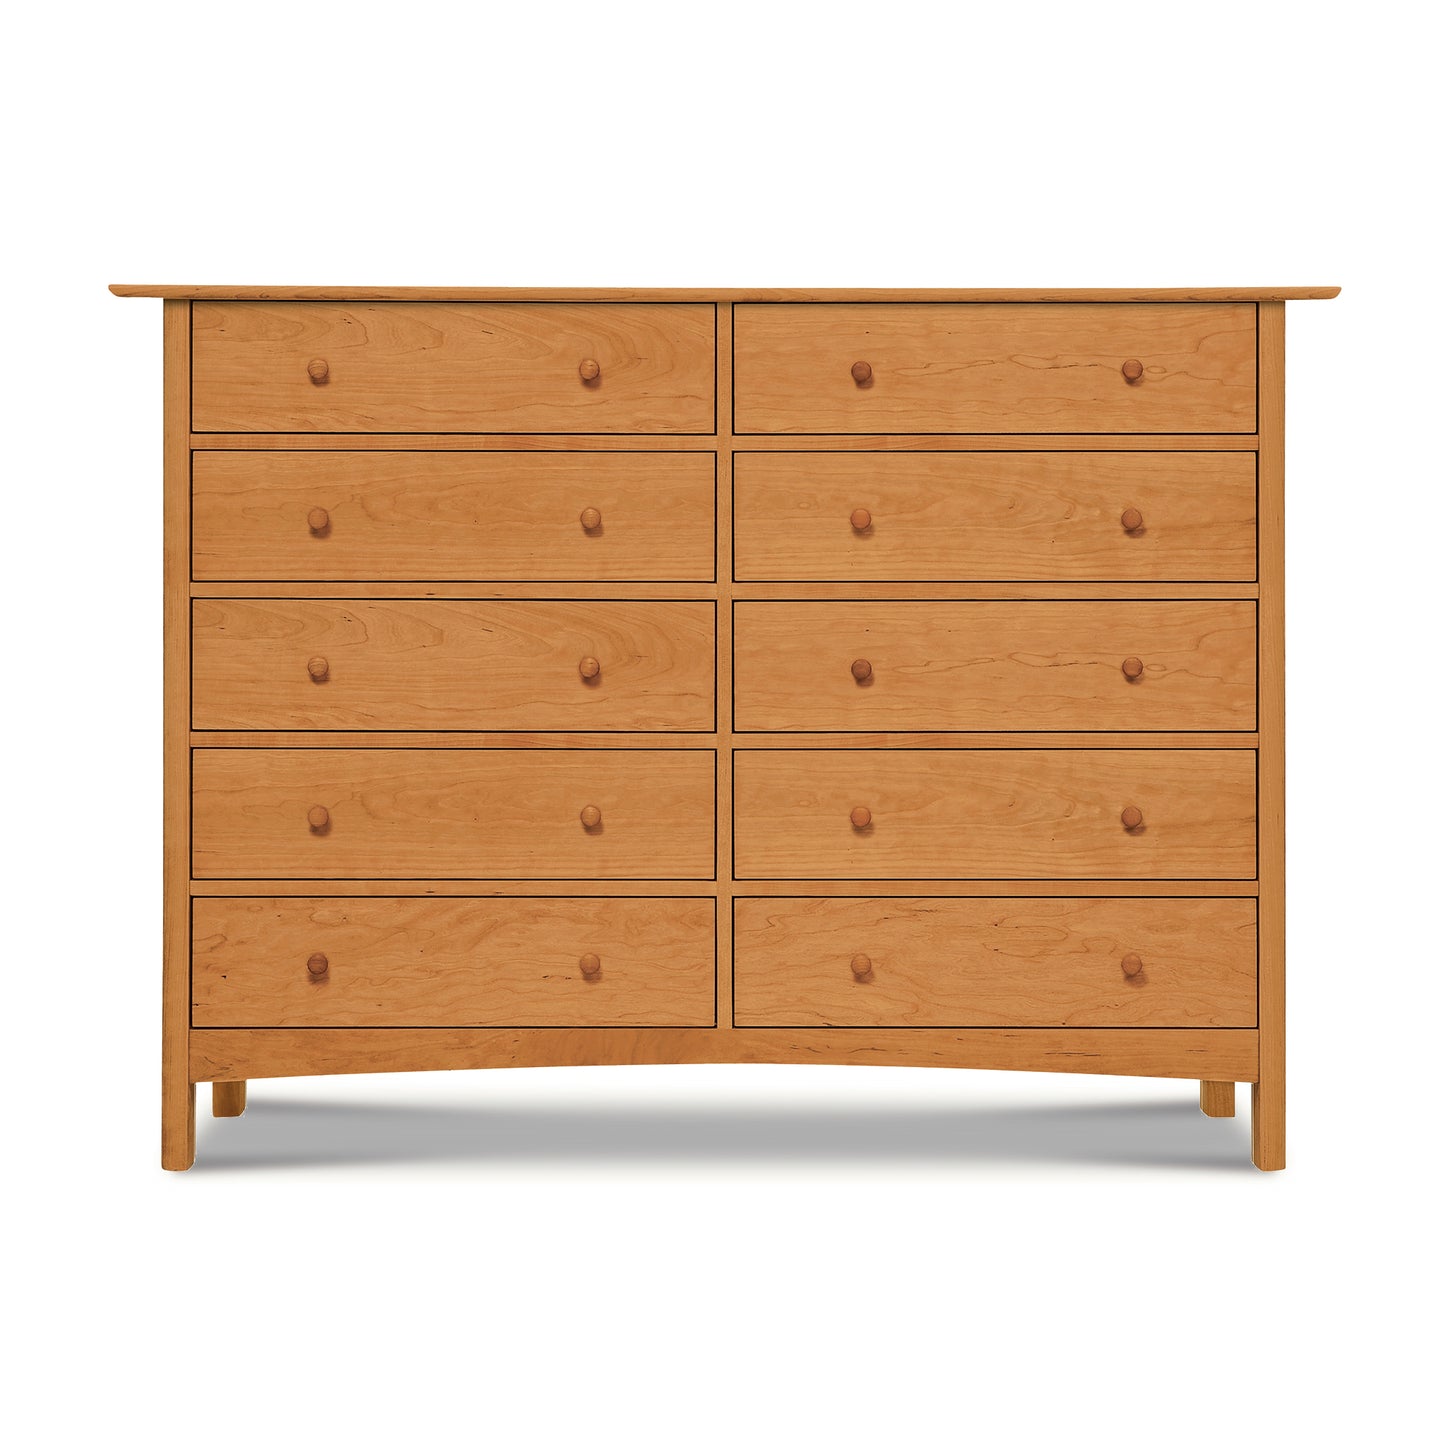 A solid wood dresser from the Heartwood Shaker 10-Drawer Dresser collection by Vermont Furniture Designs, isolated on a white background.